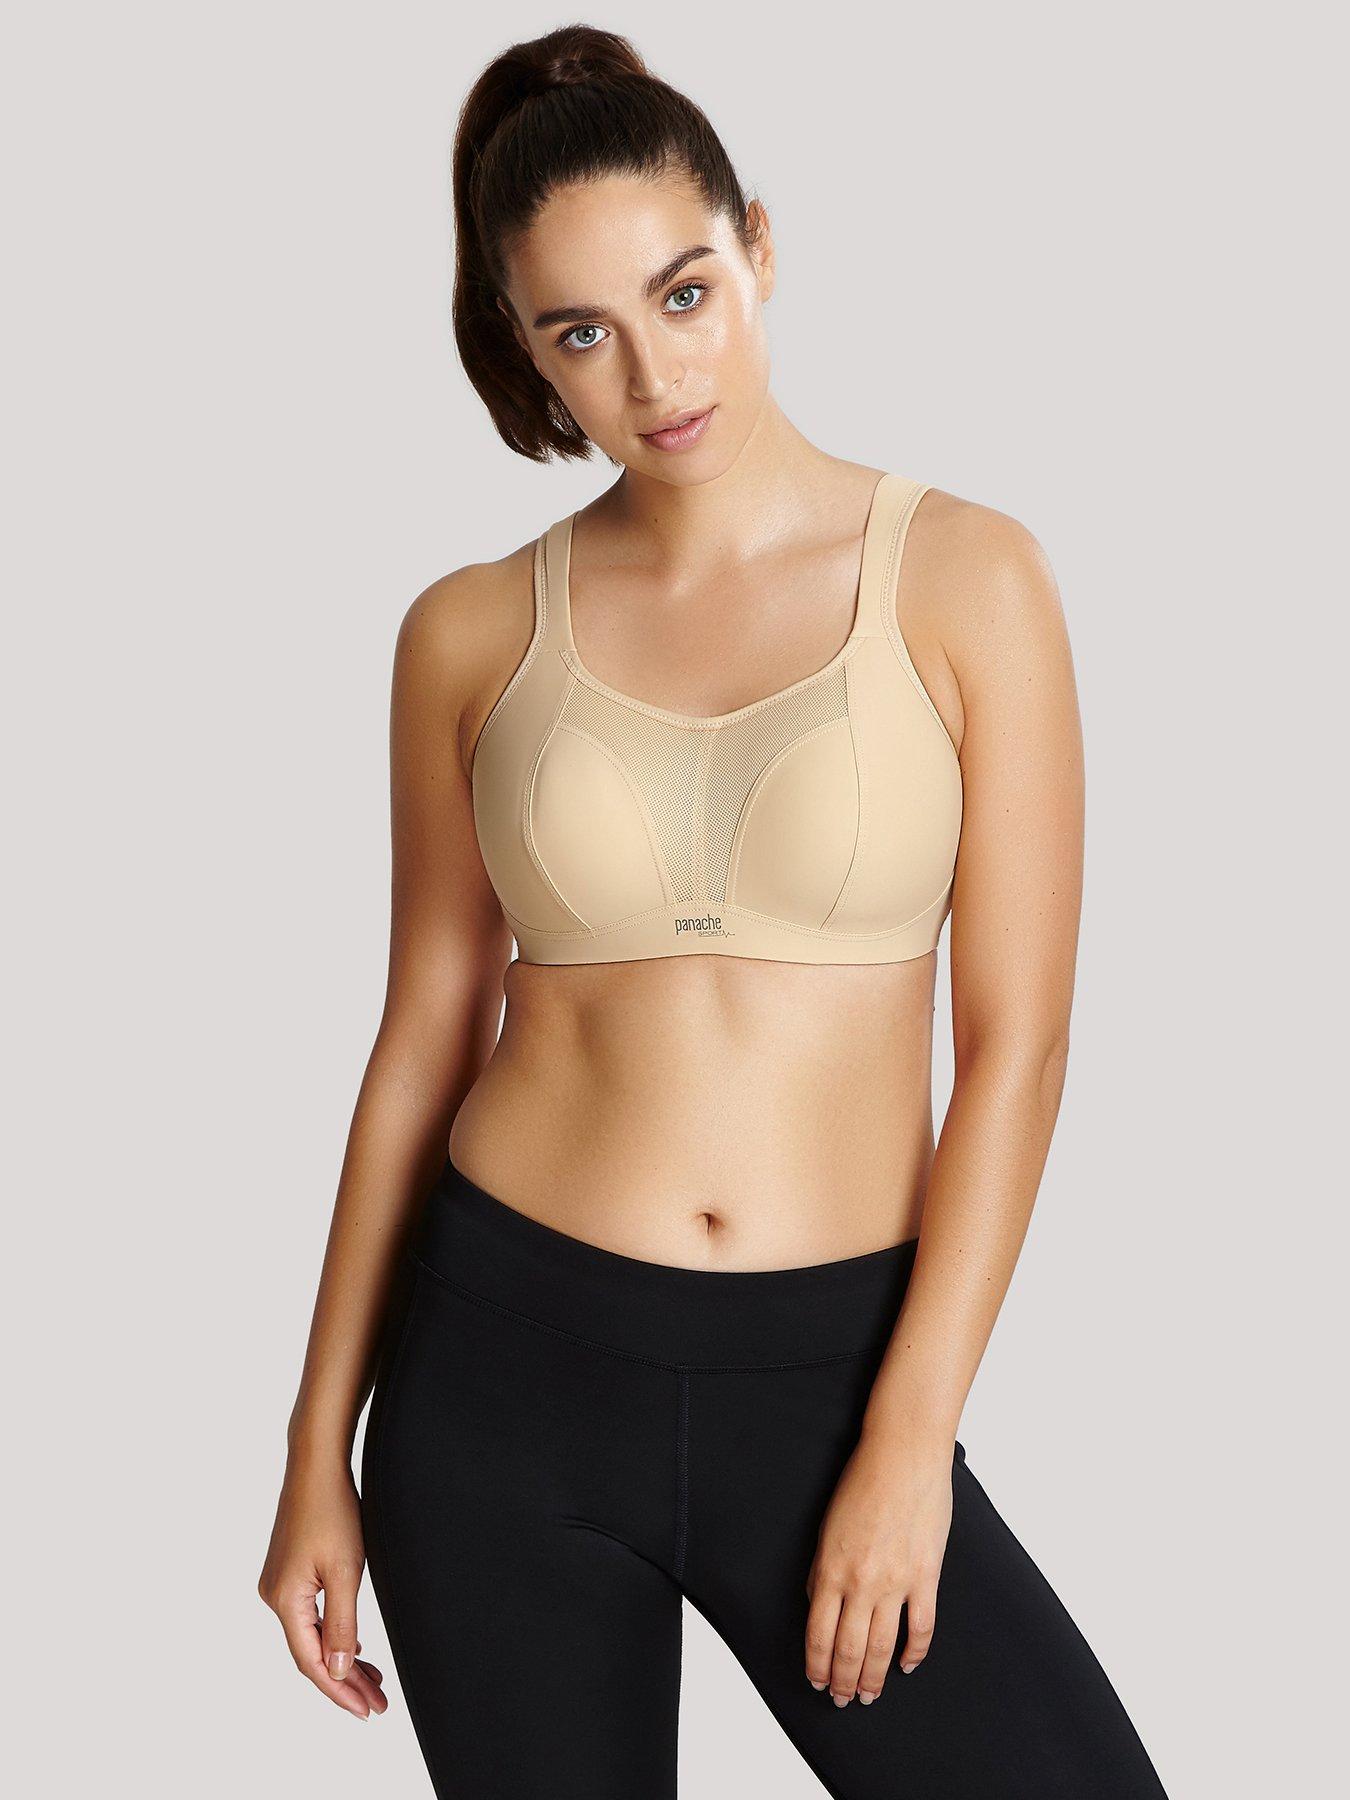 Pour Moi Energy Empower U/W Lightly Padded Convertible Sports Bra - White